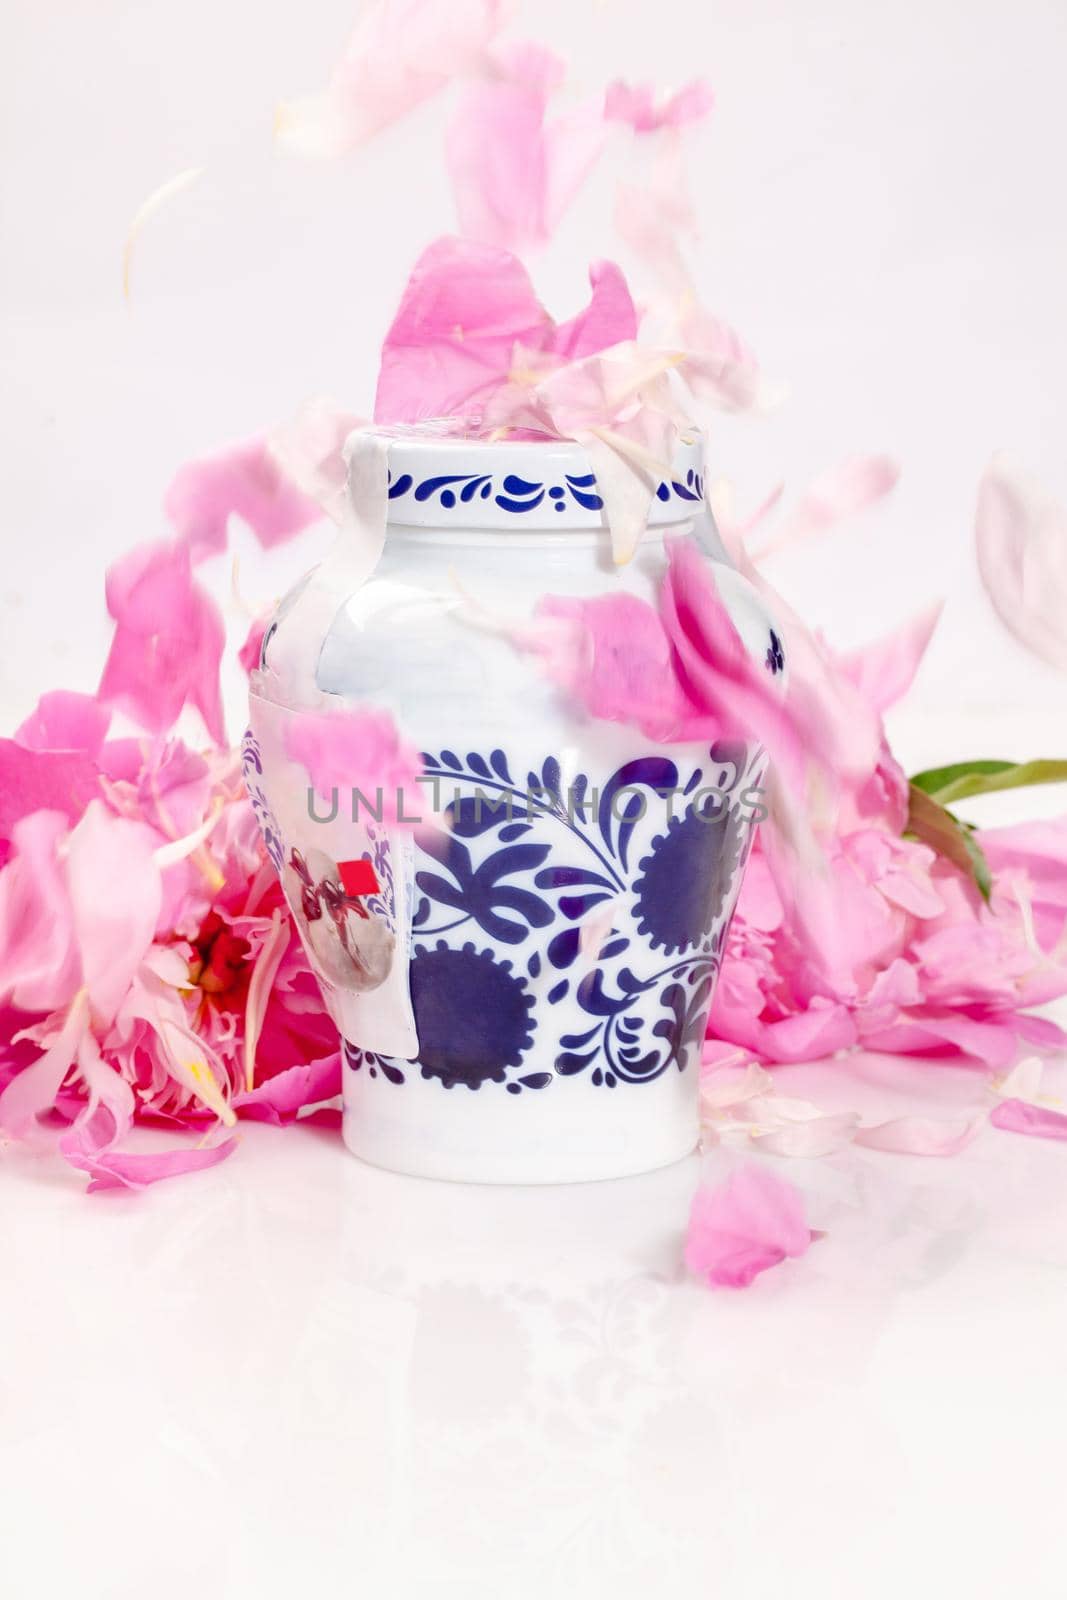 Decorative jar with blue floral patterns sprinkled with pink peony petals by nazarovsergey